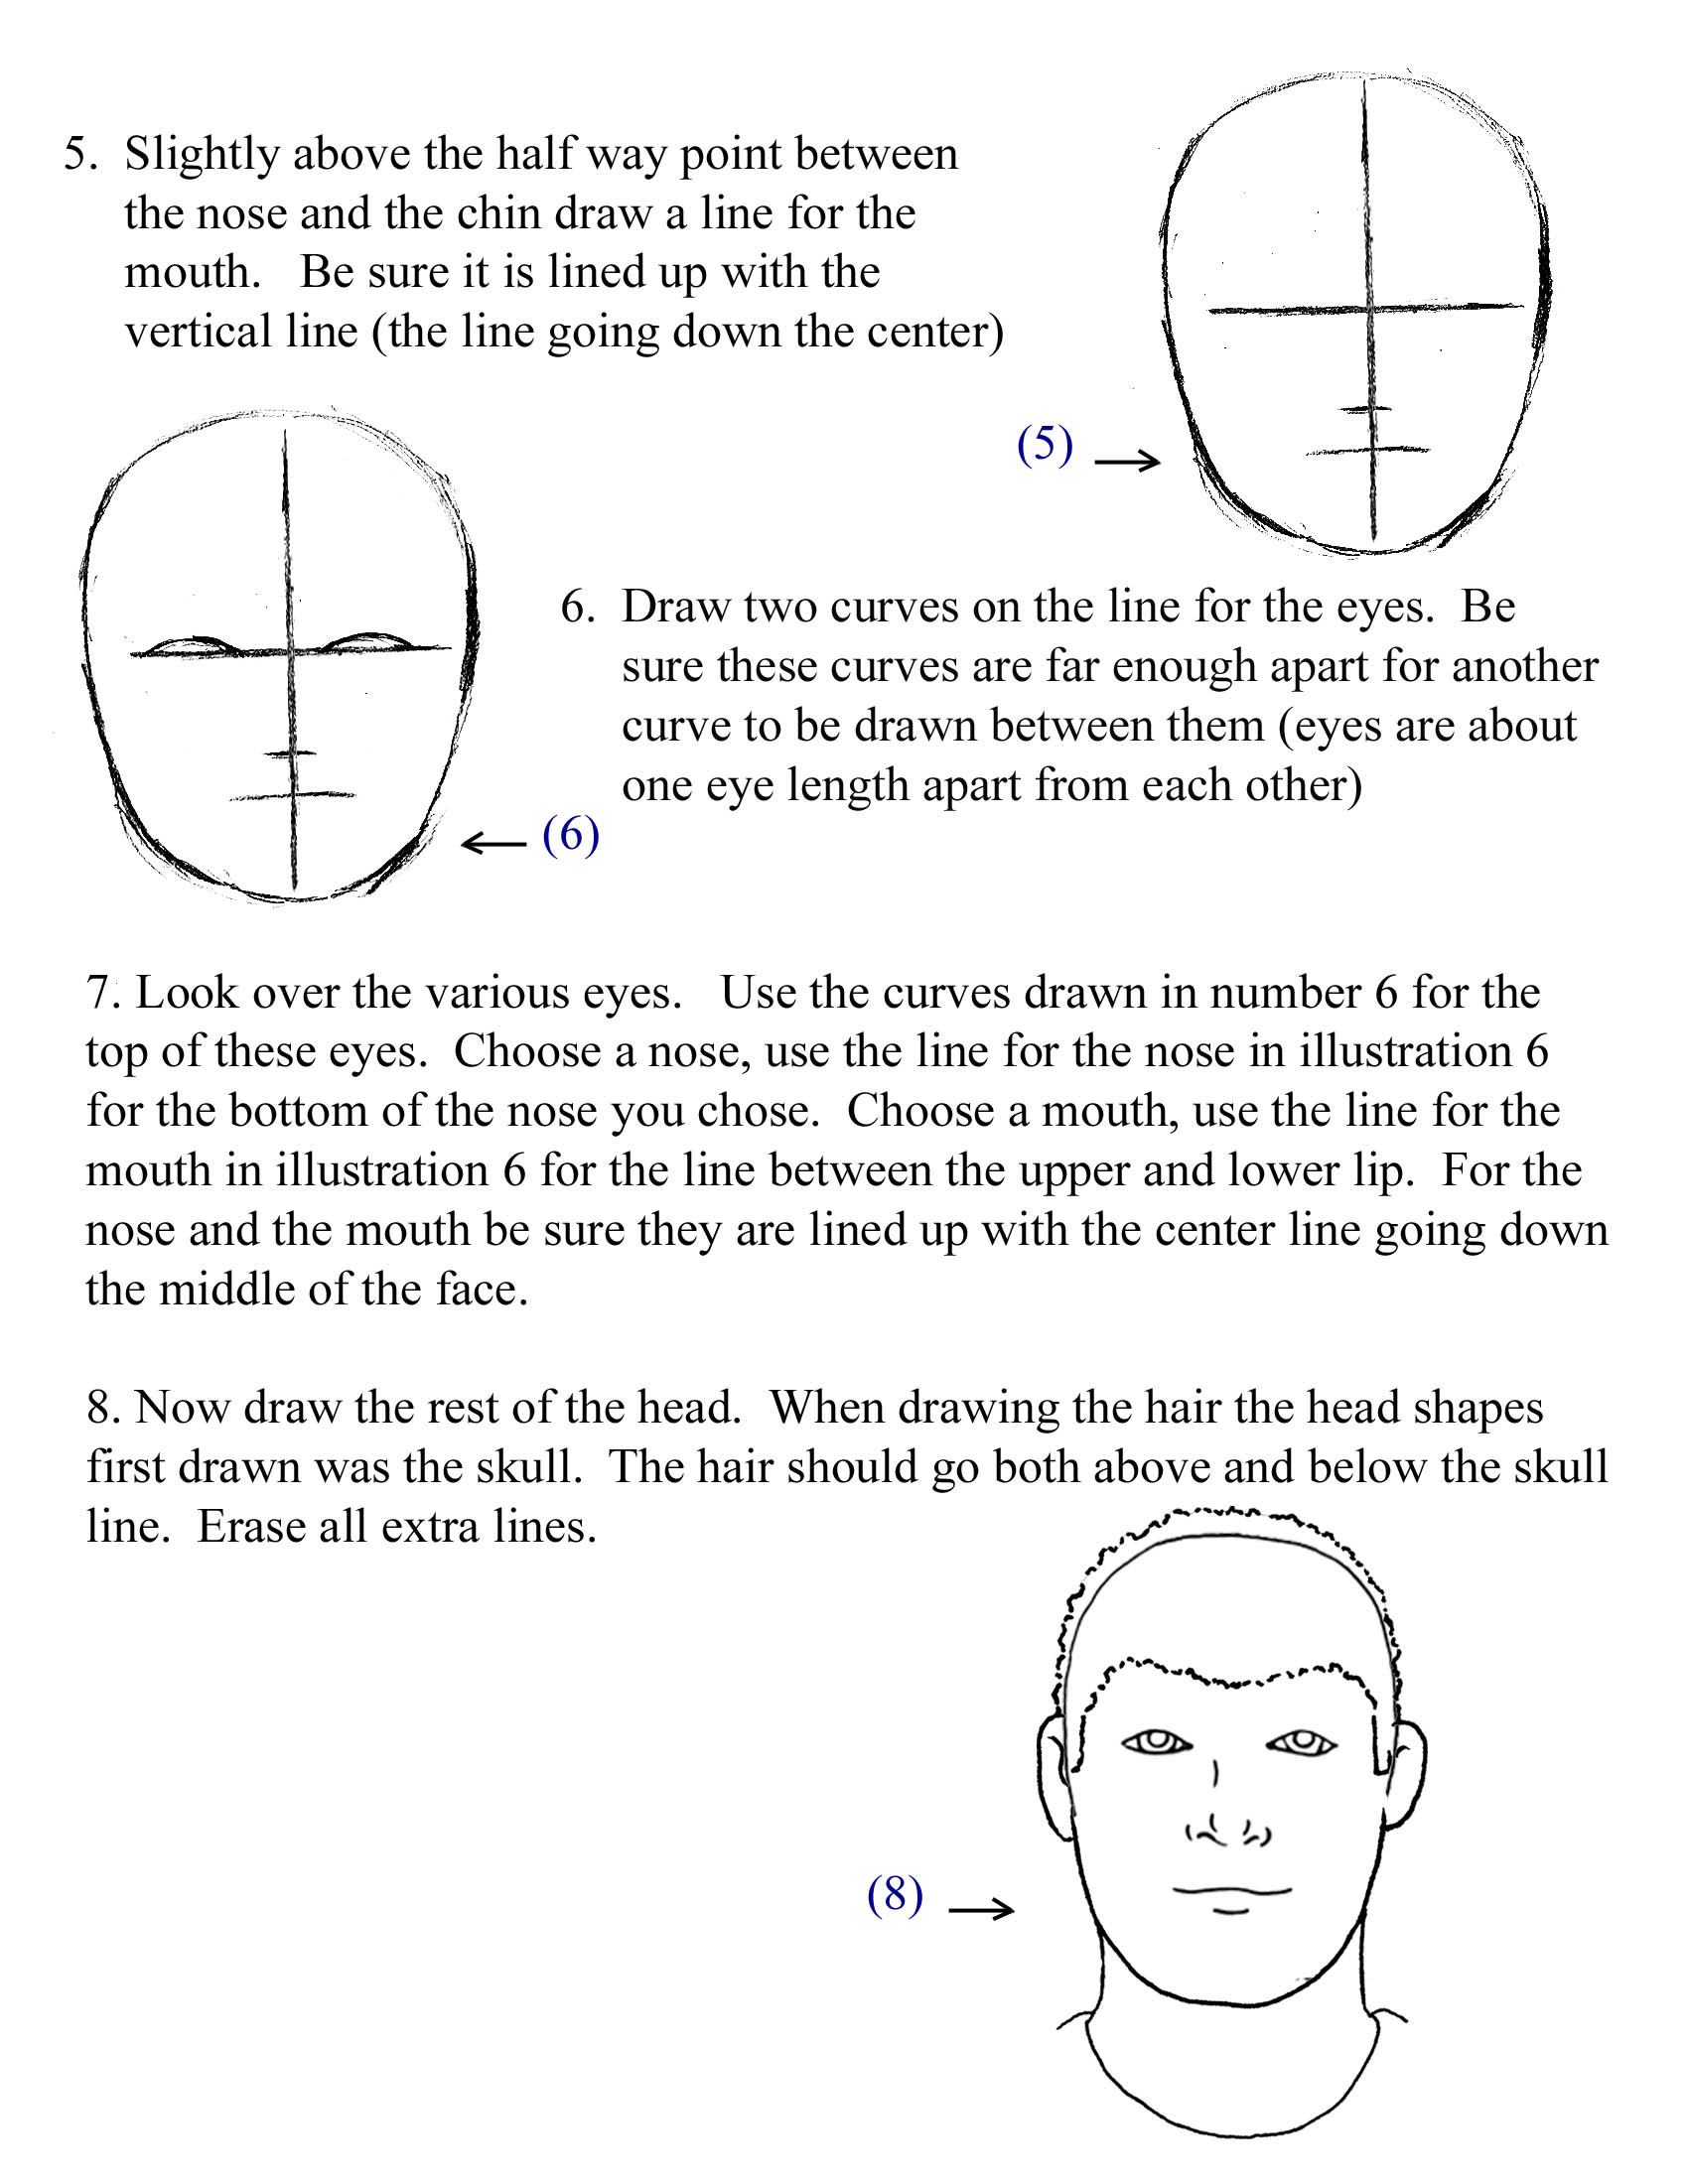 Learn how to draw PORTRAIT DRAWINGS